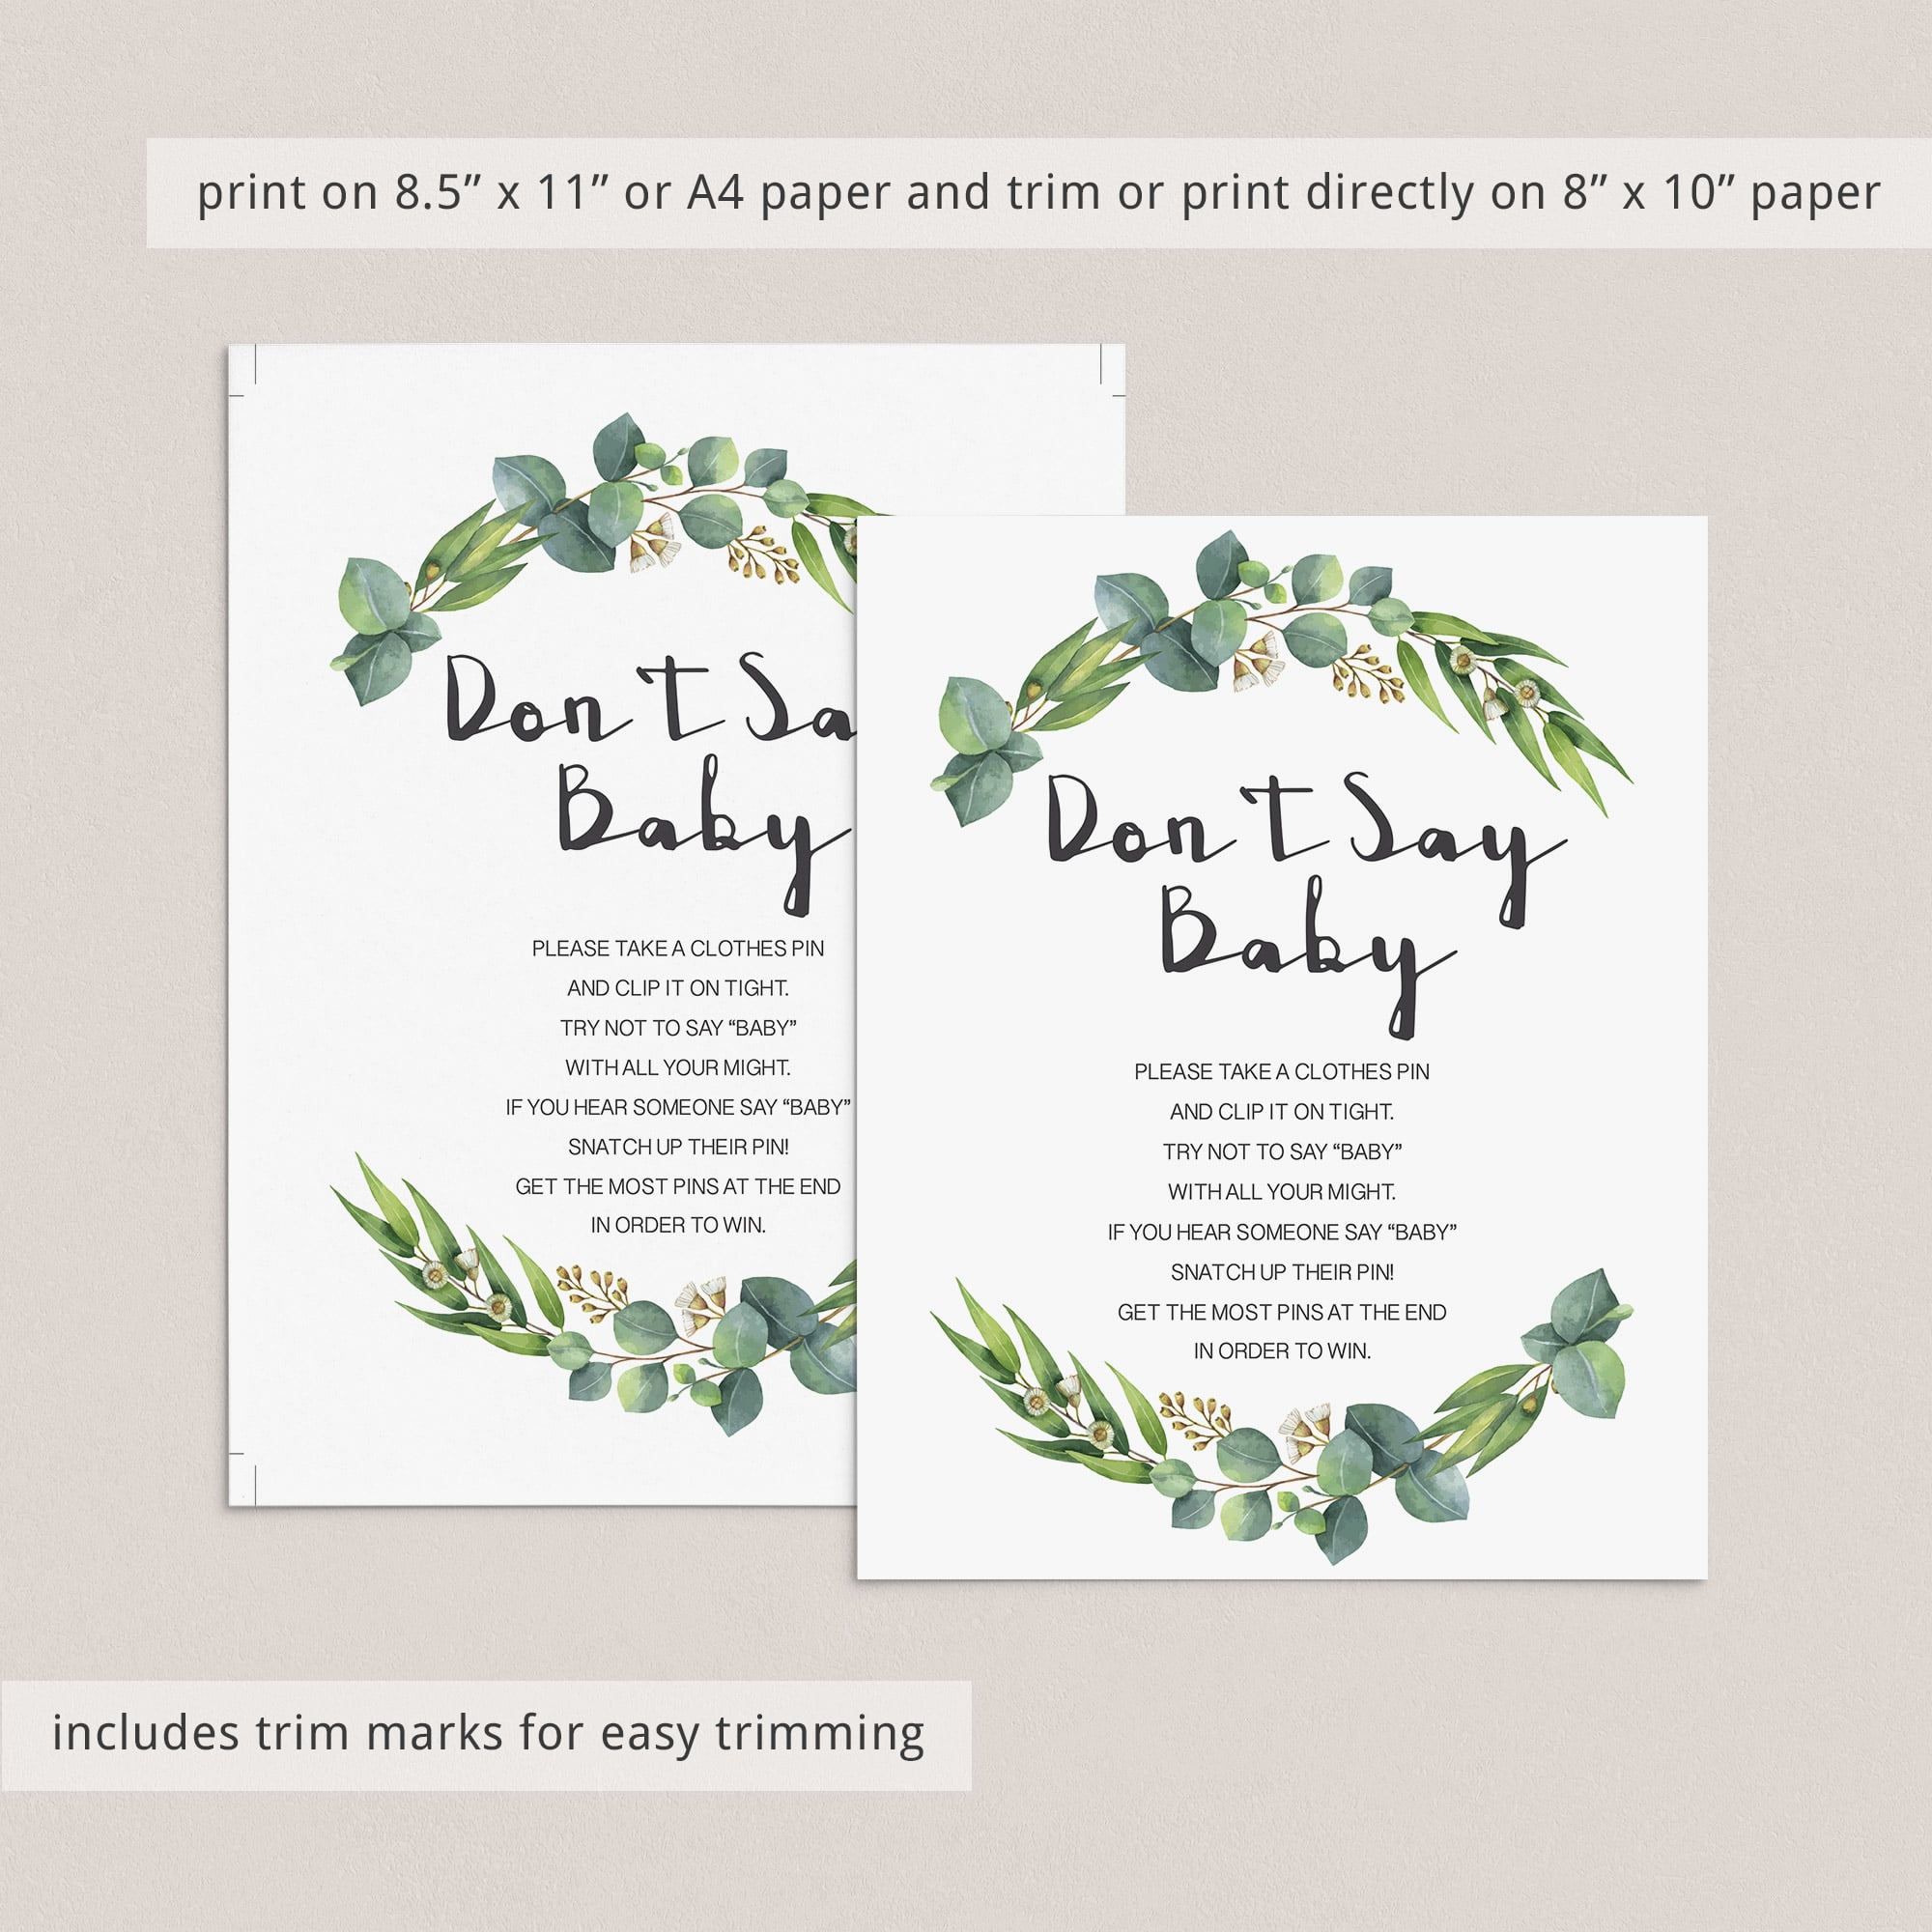 Baby shower table decor gender neutral greenery themed by LittleSizzle